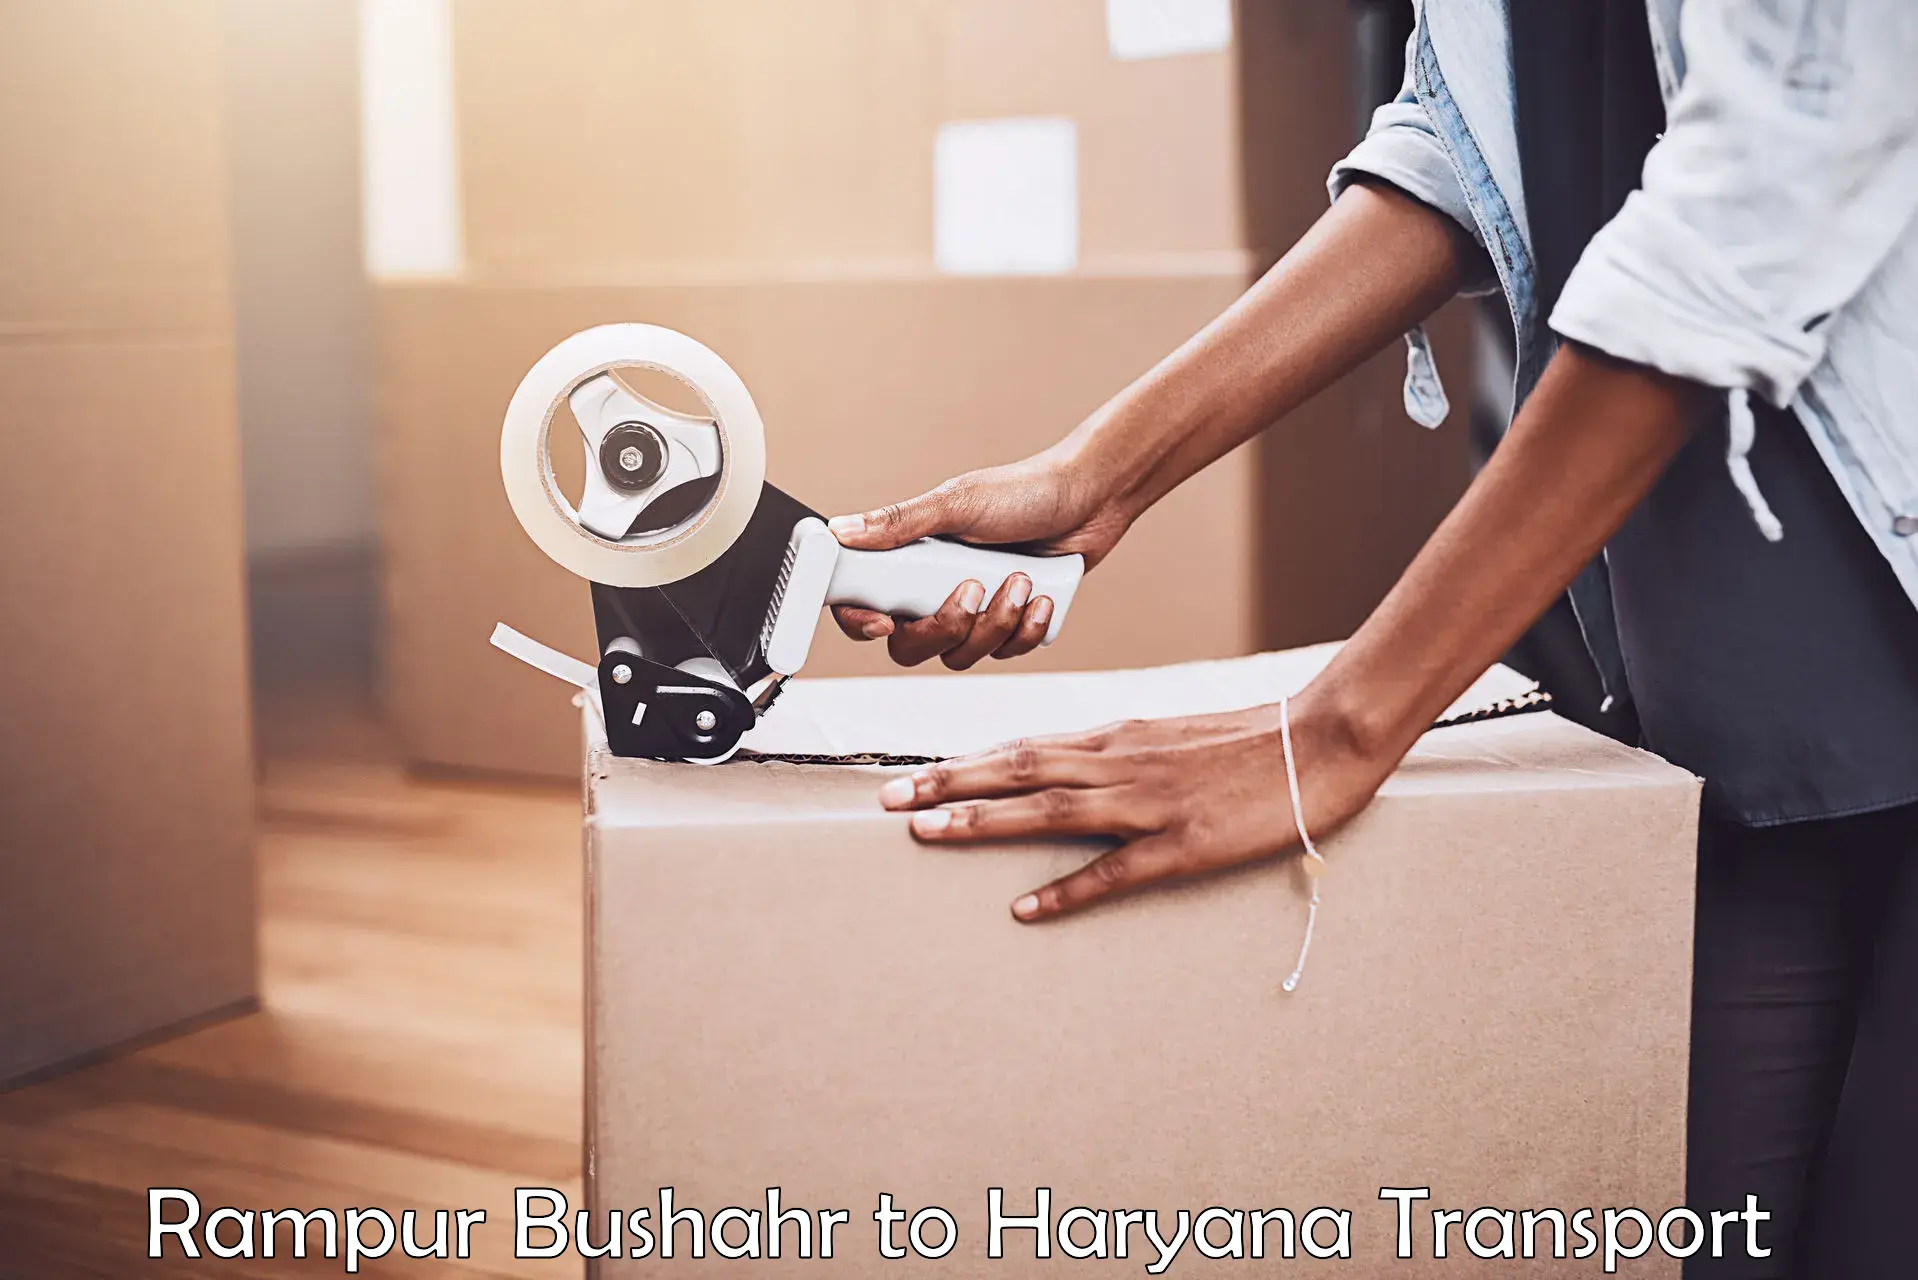 Container transport service Rampur Bushahr to Bahal